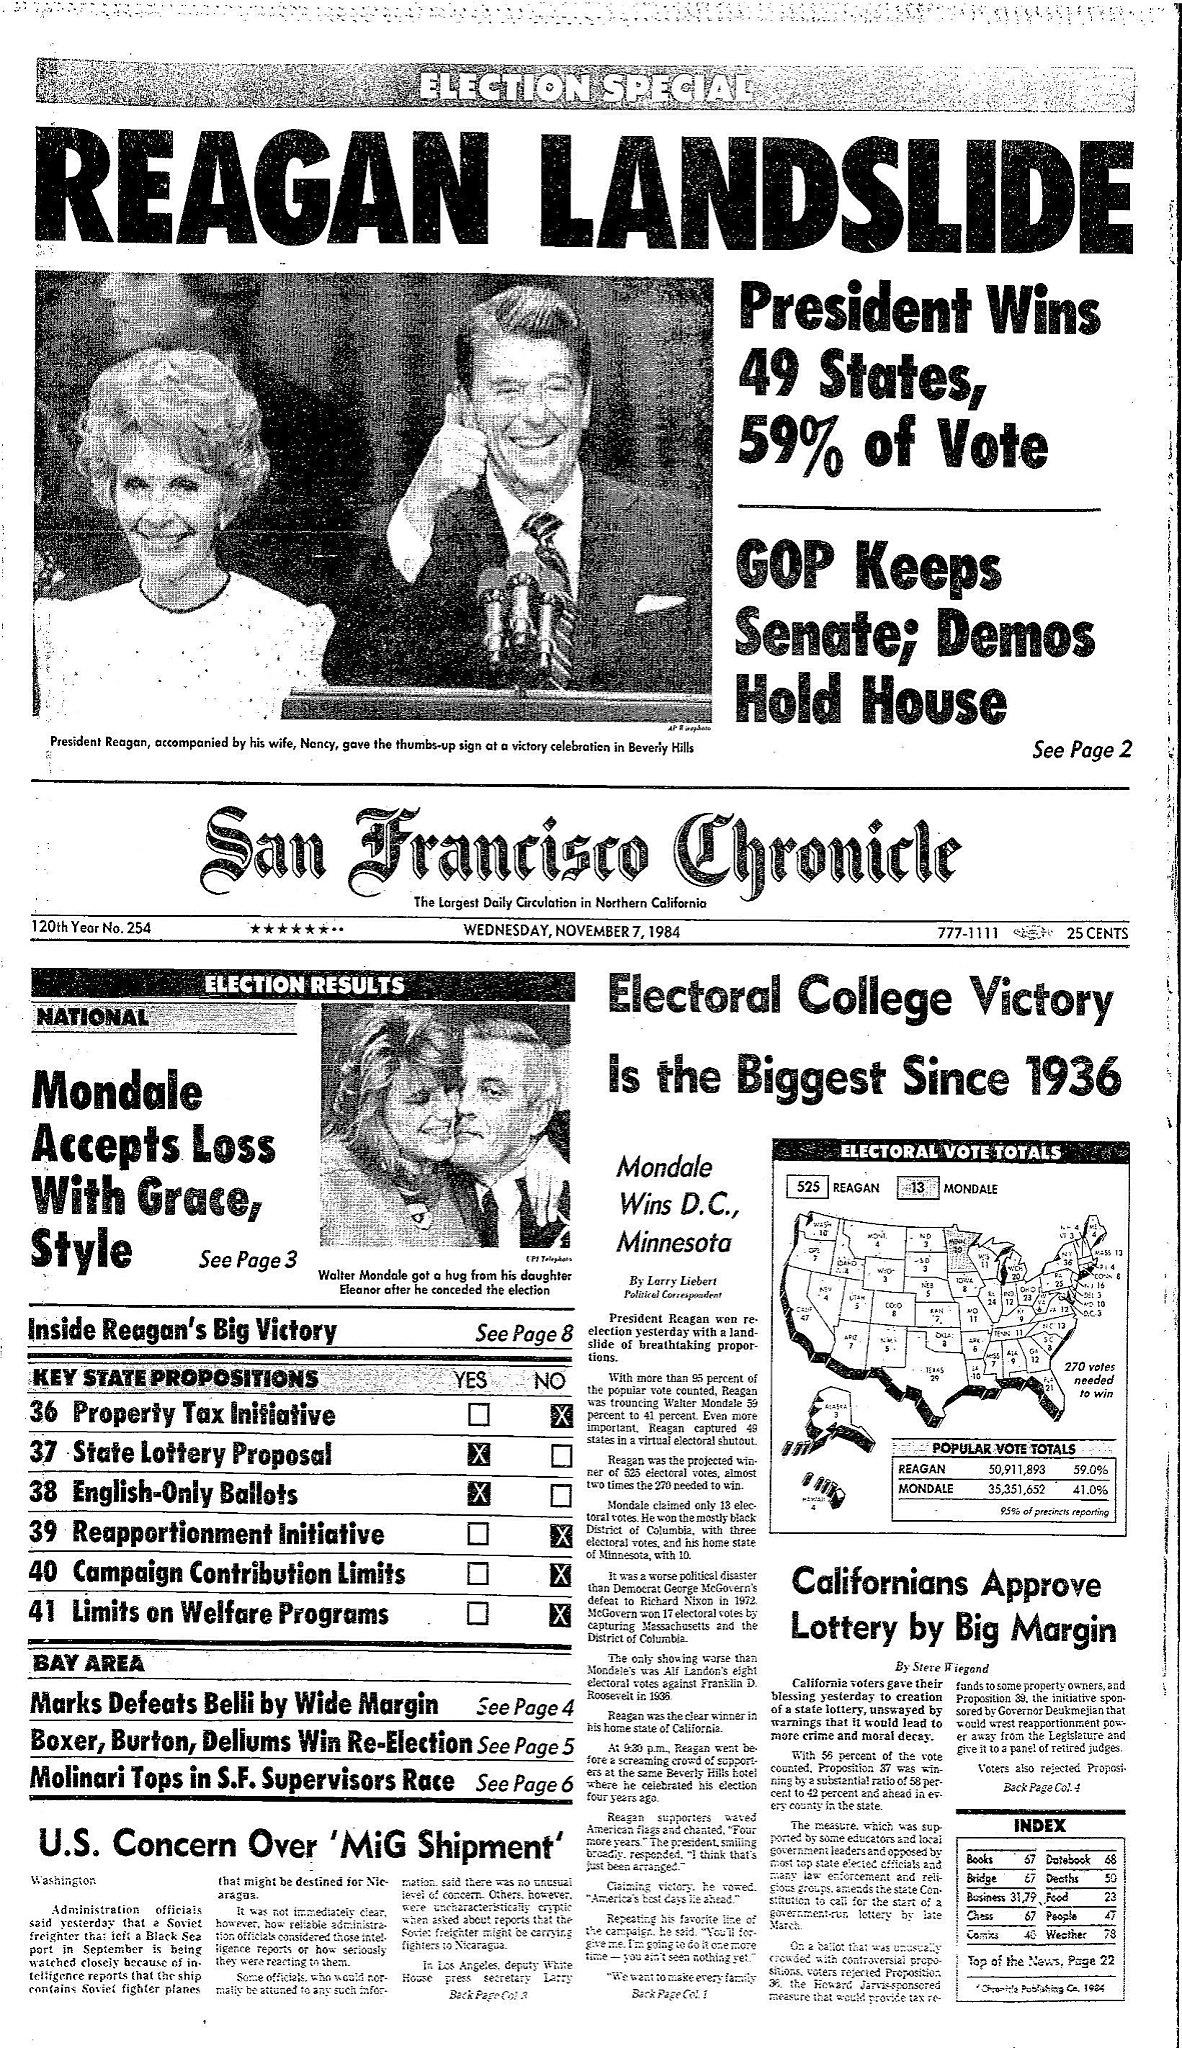 Chronicle Covers: Ronald Reagan’s resounding re-election victory - SFChronicle.com1182 x 2048